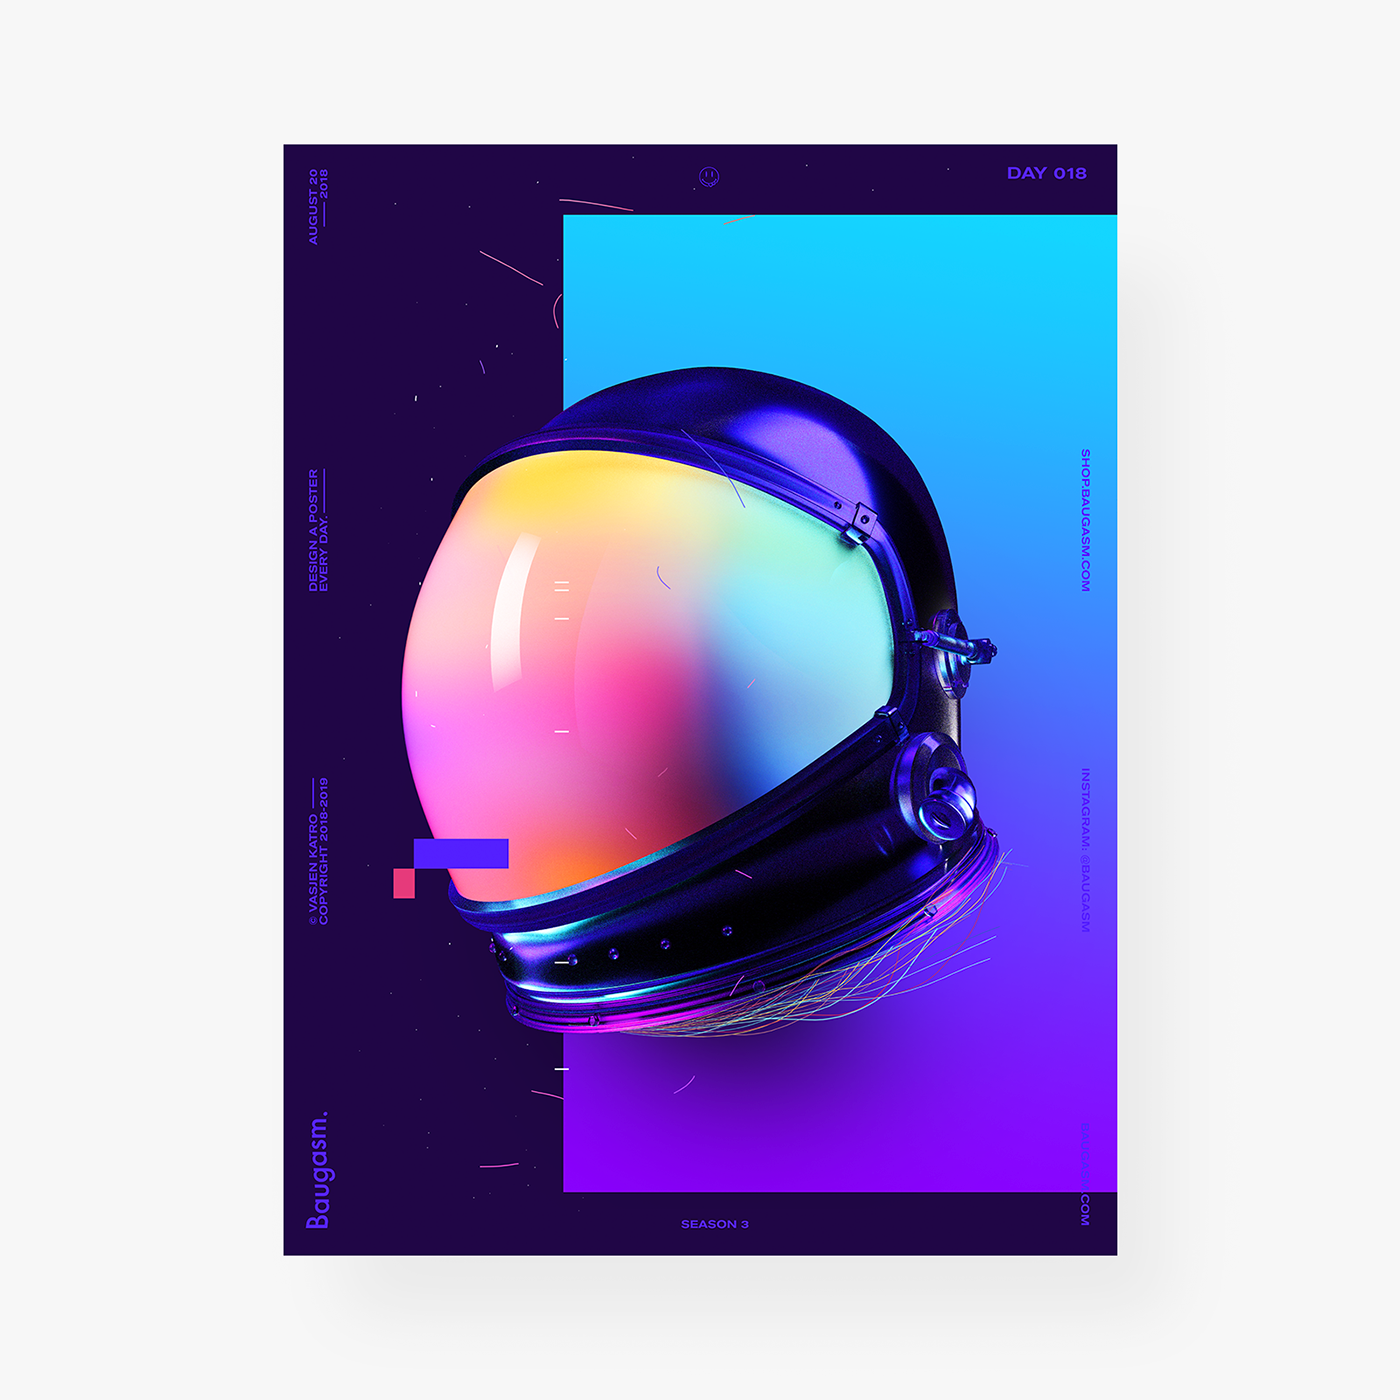 poster gradient Baugasm graphic design  abstract posters daily typography  